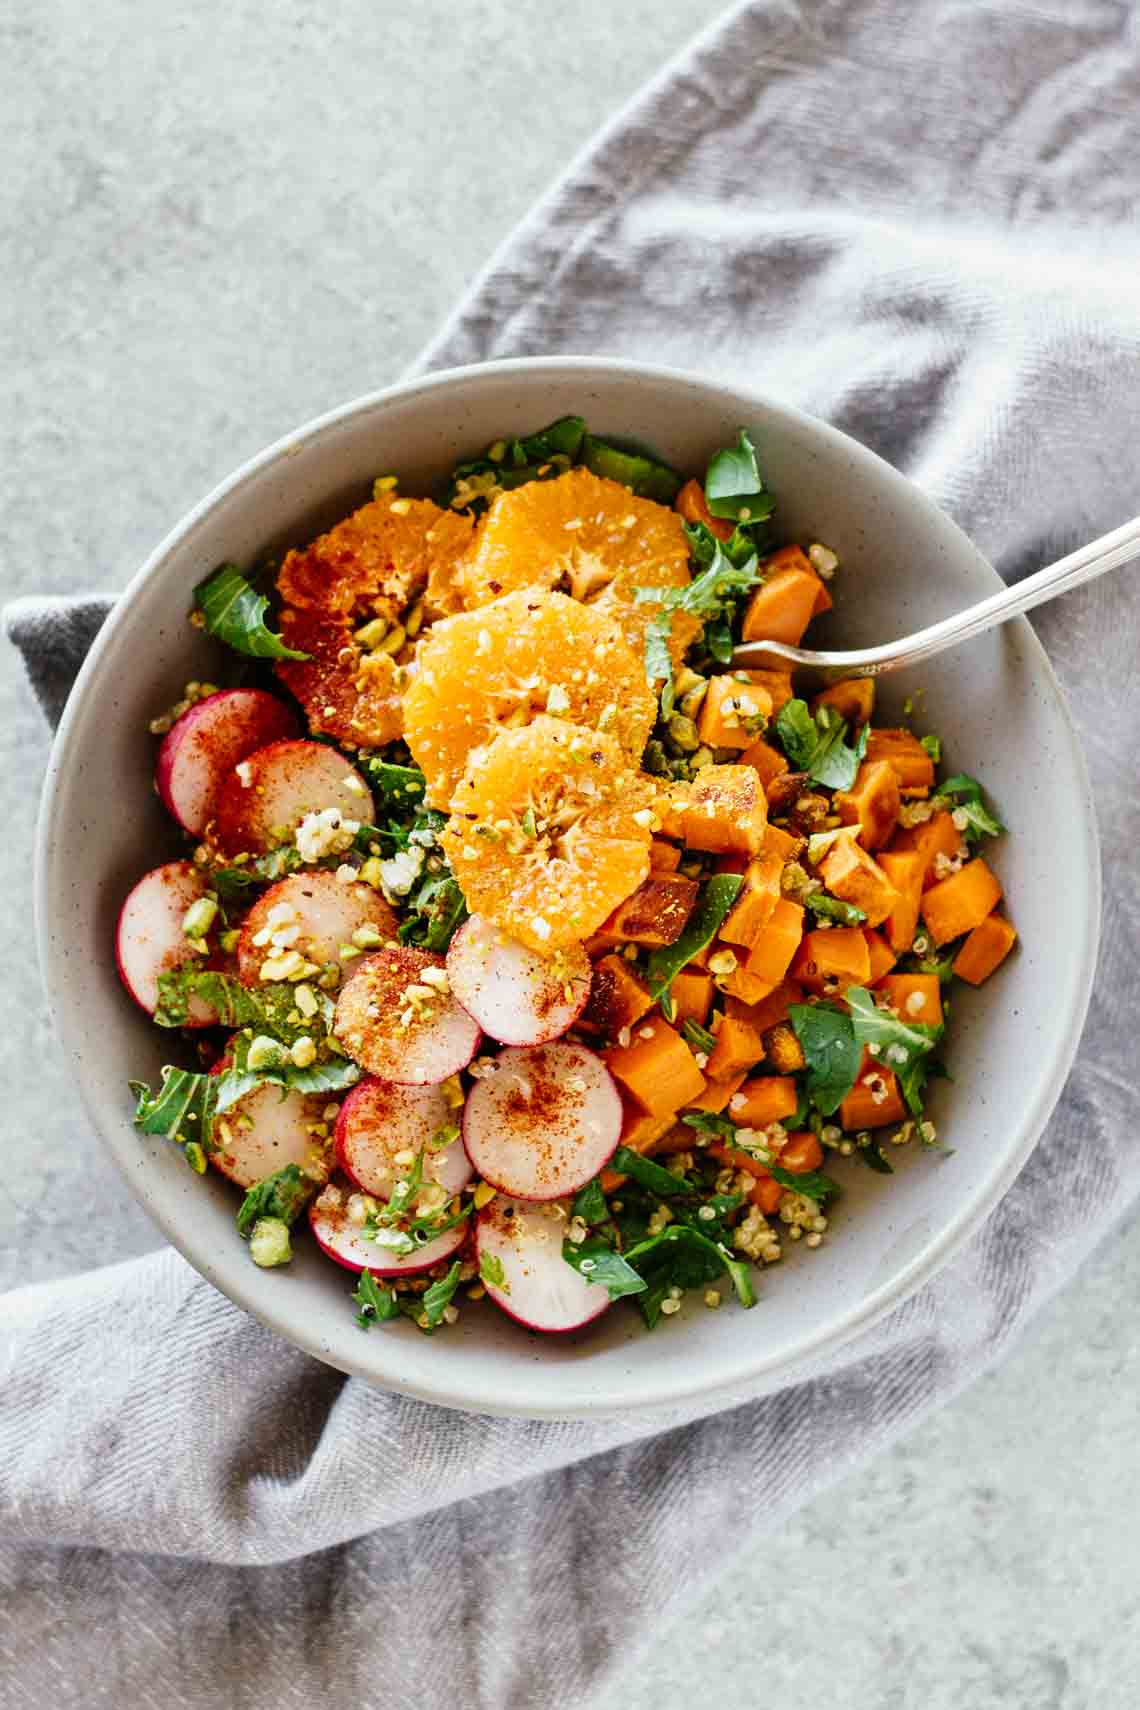 detox with this radish tangerine bowl with quinoa and greens